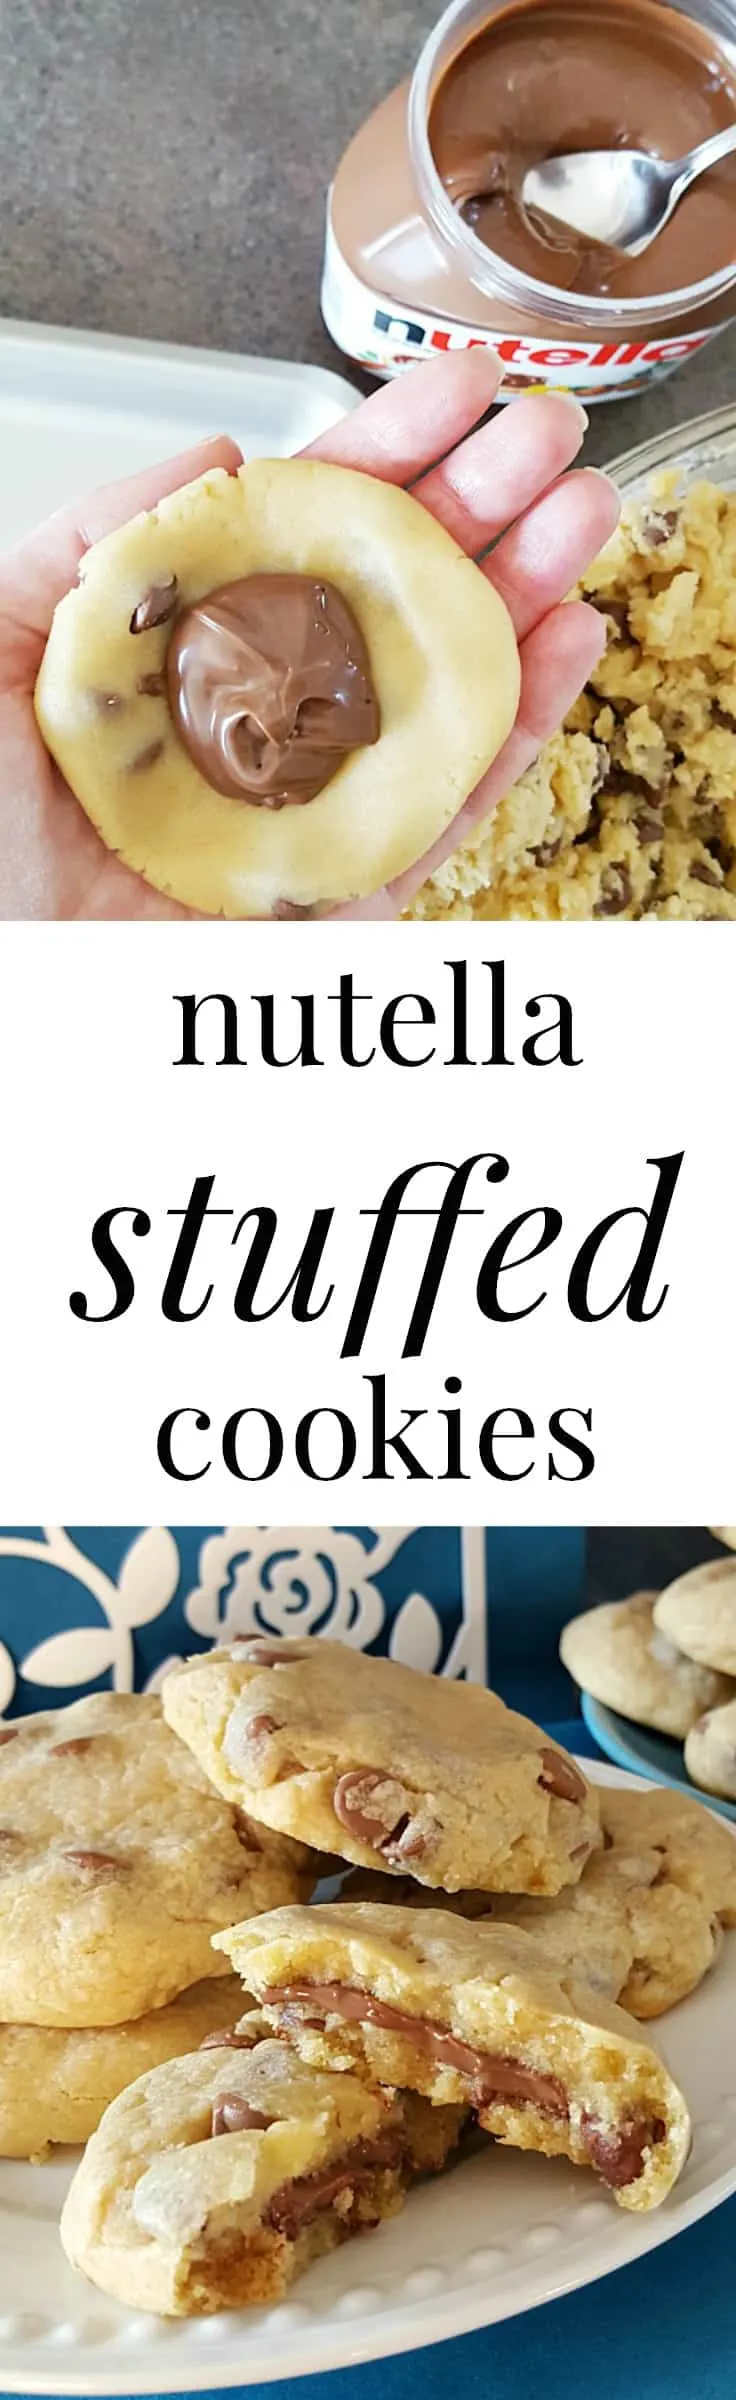 Rich and creamy Nutella meets up with a soft chocolate chip cookie to bring an explosion of chocolatey goodness in your mouth! These Nutella stuffed cookies are completely irresistible.